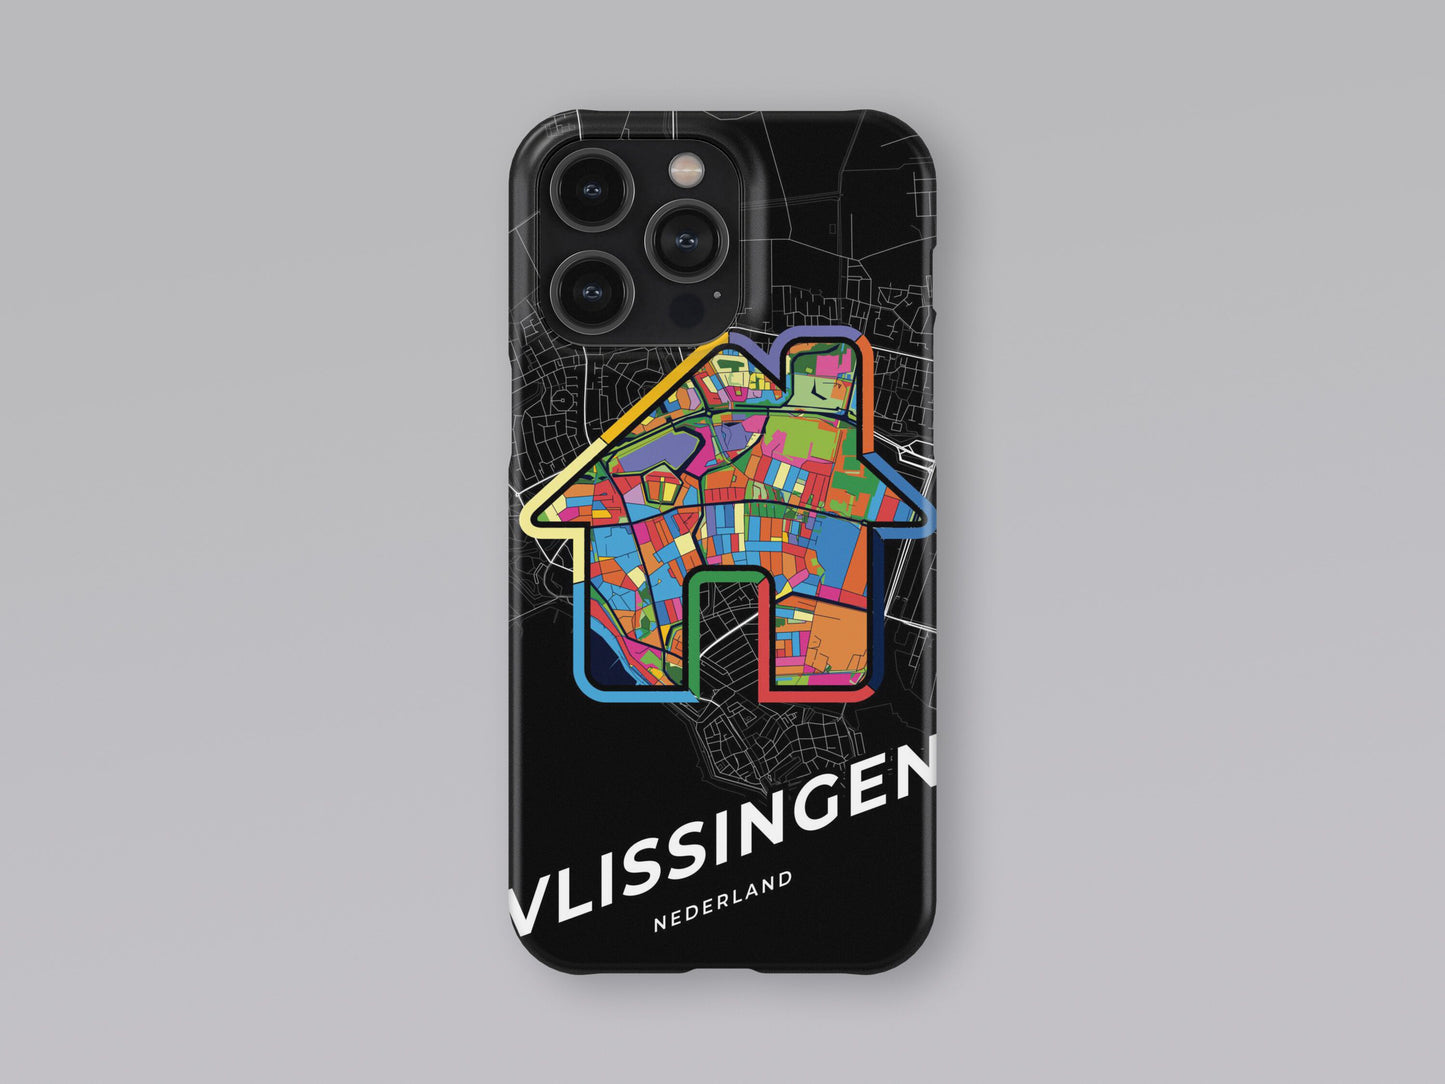 Vlissingen Netherlands slim phone case with colorful icon 3